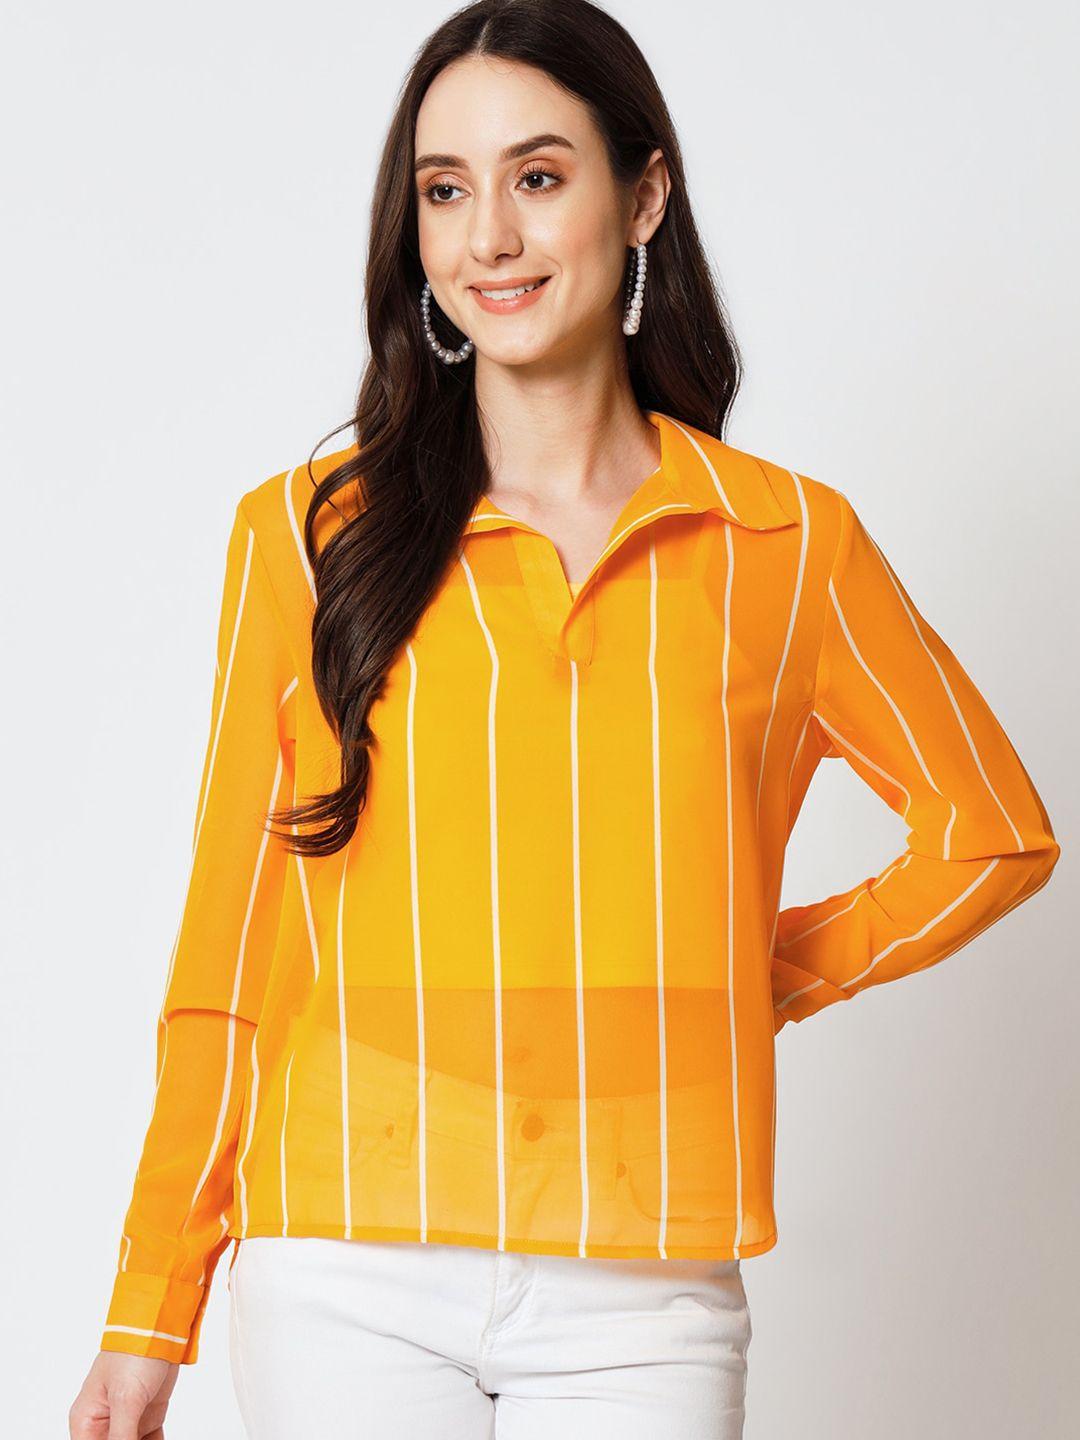 yaadleen vertical striped cuffed sleeves shirt style top